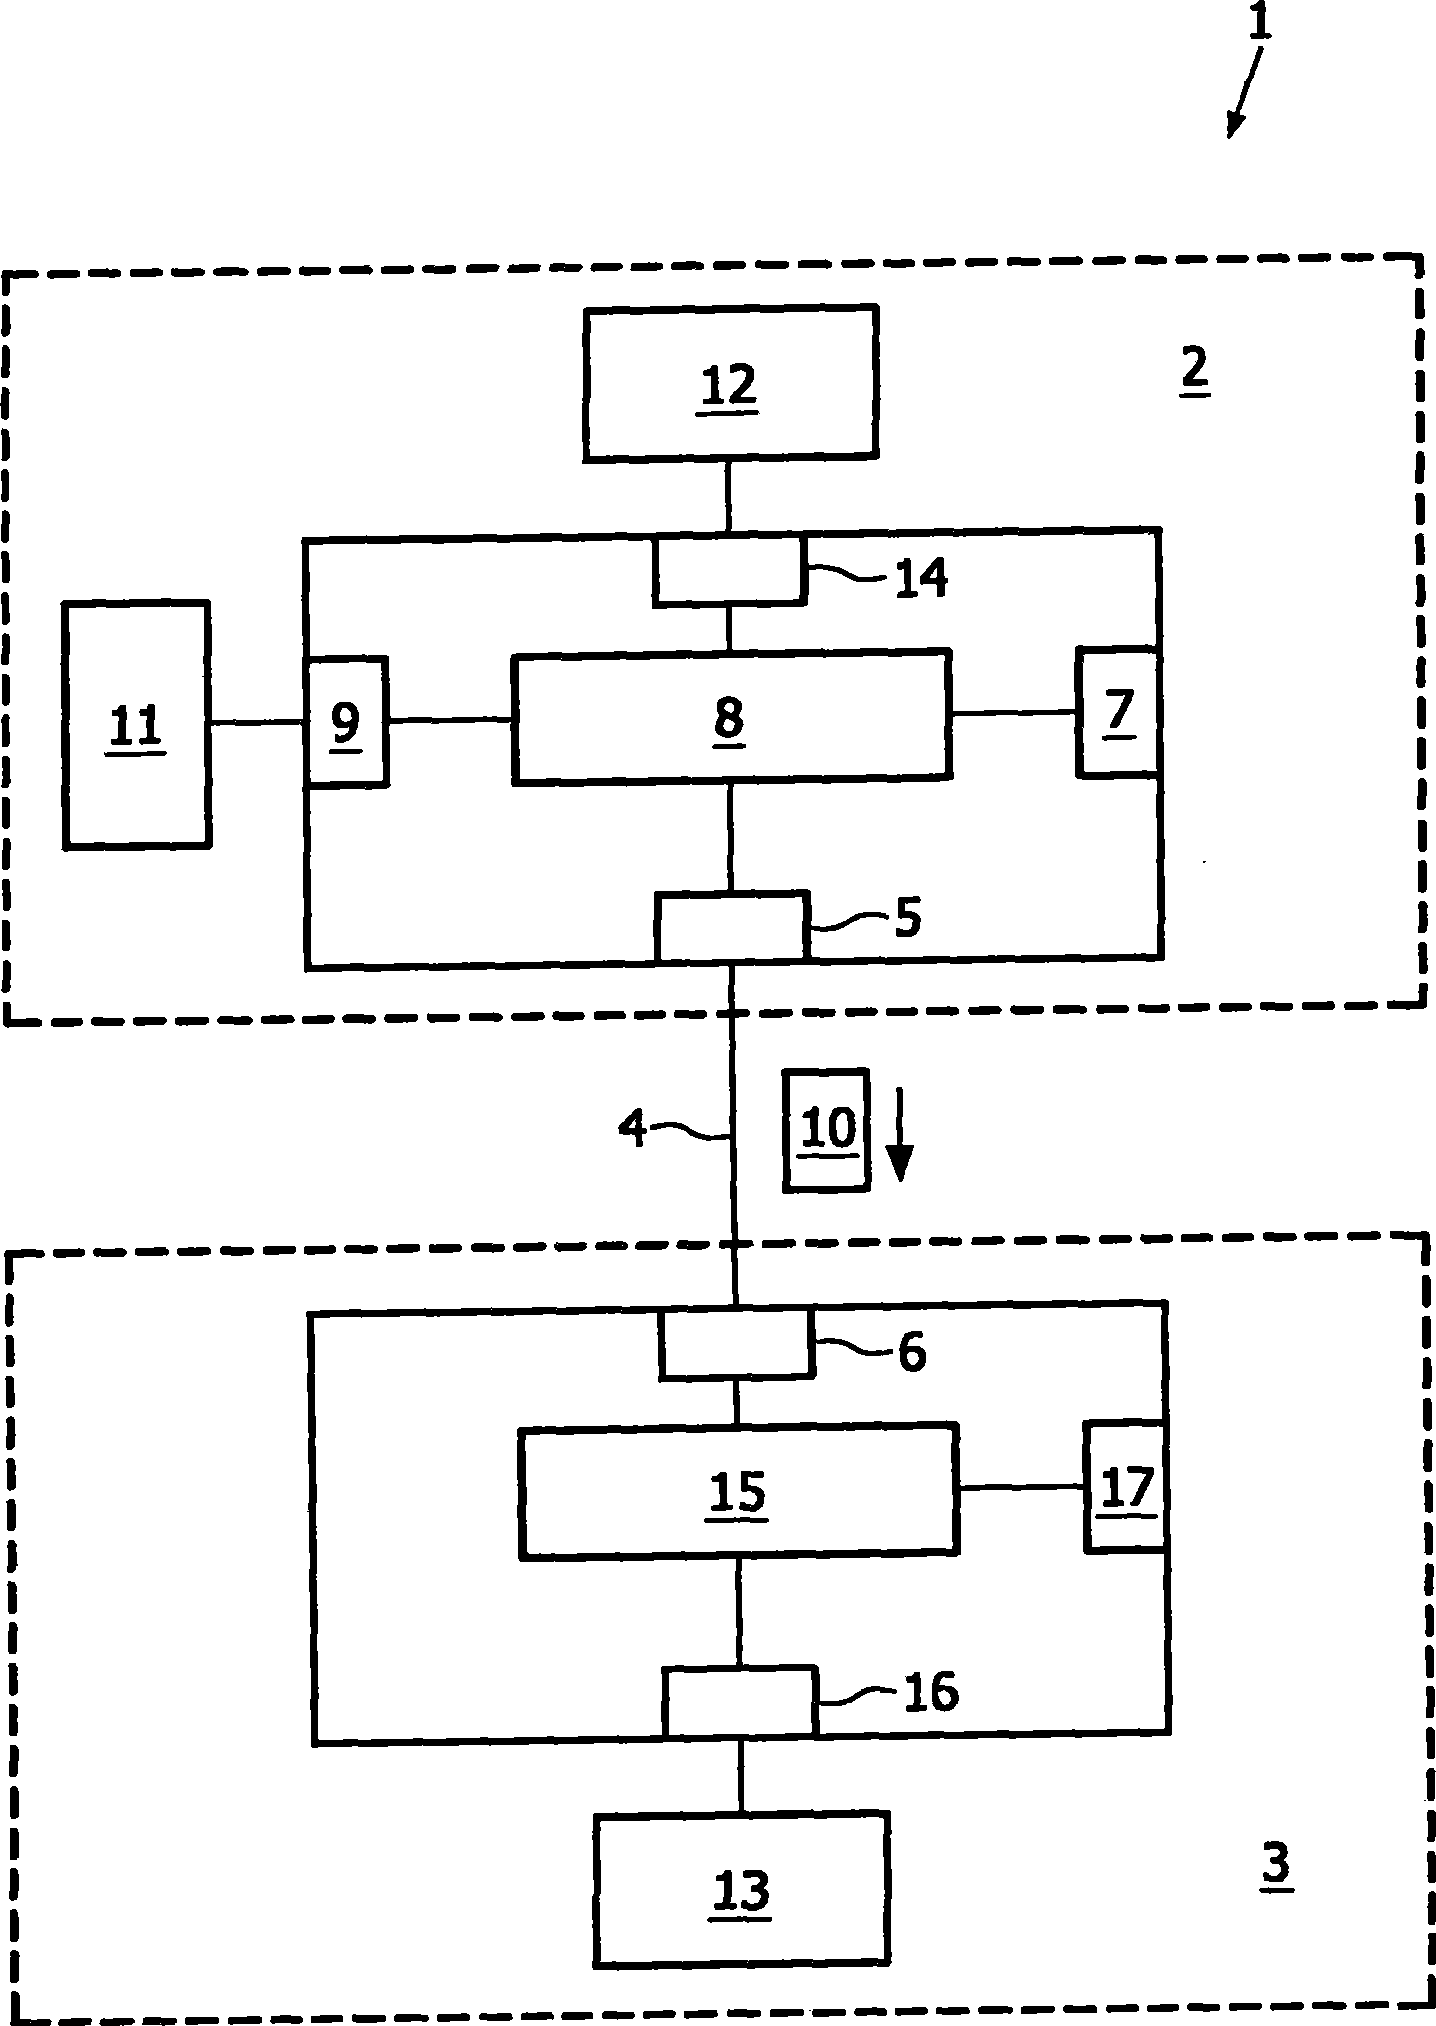 A method of deriving a graphical representation of domain-specific display objects on an external display